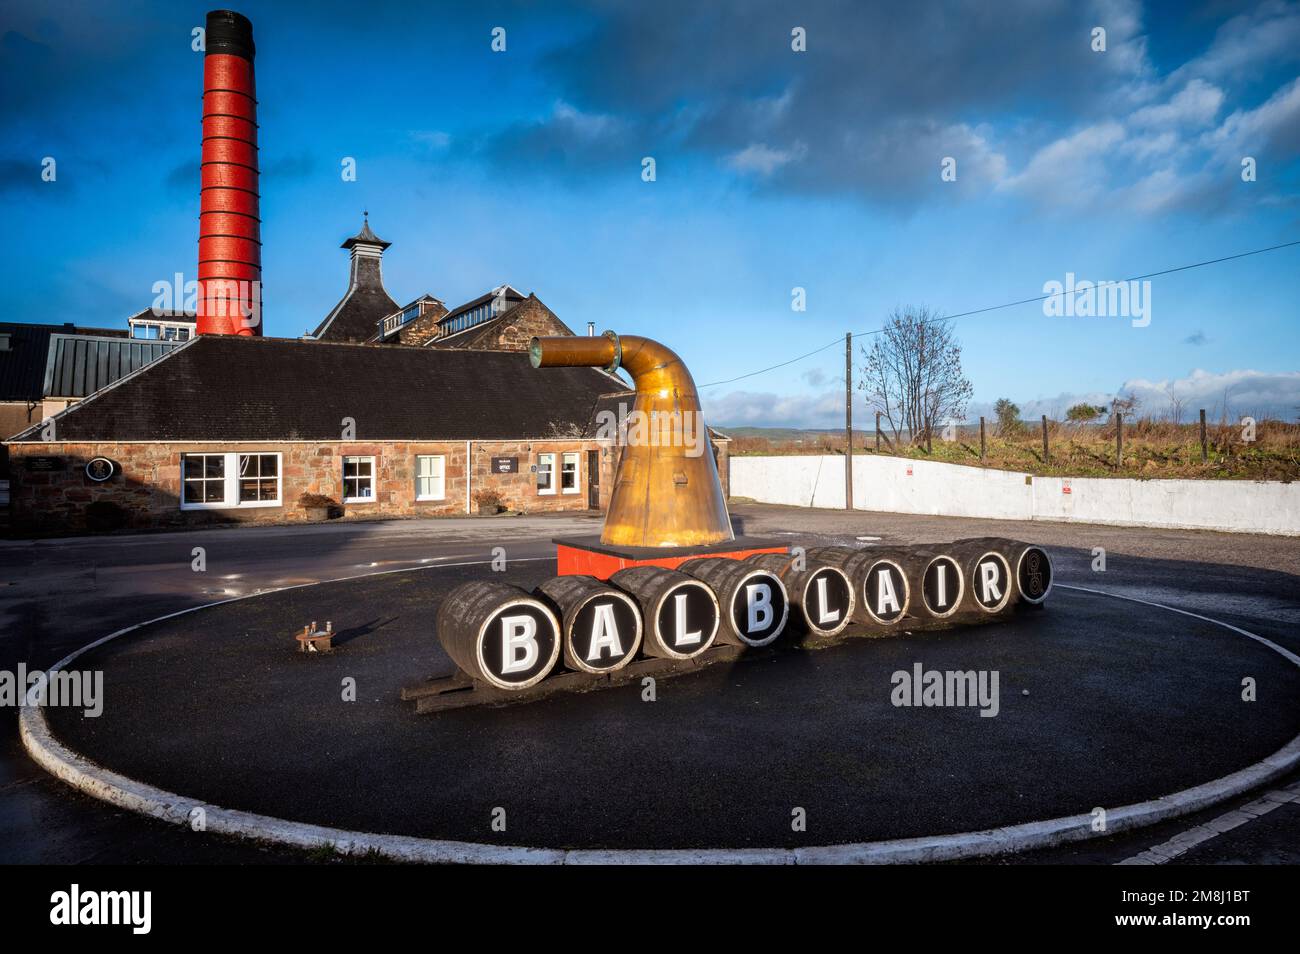 I stumbled upon Balblair Distillery on my travels, the old buildings reflected the warm tones of the winter sunlight nicely. Stock Photo